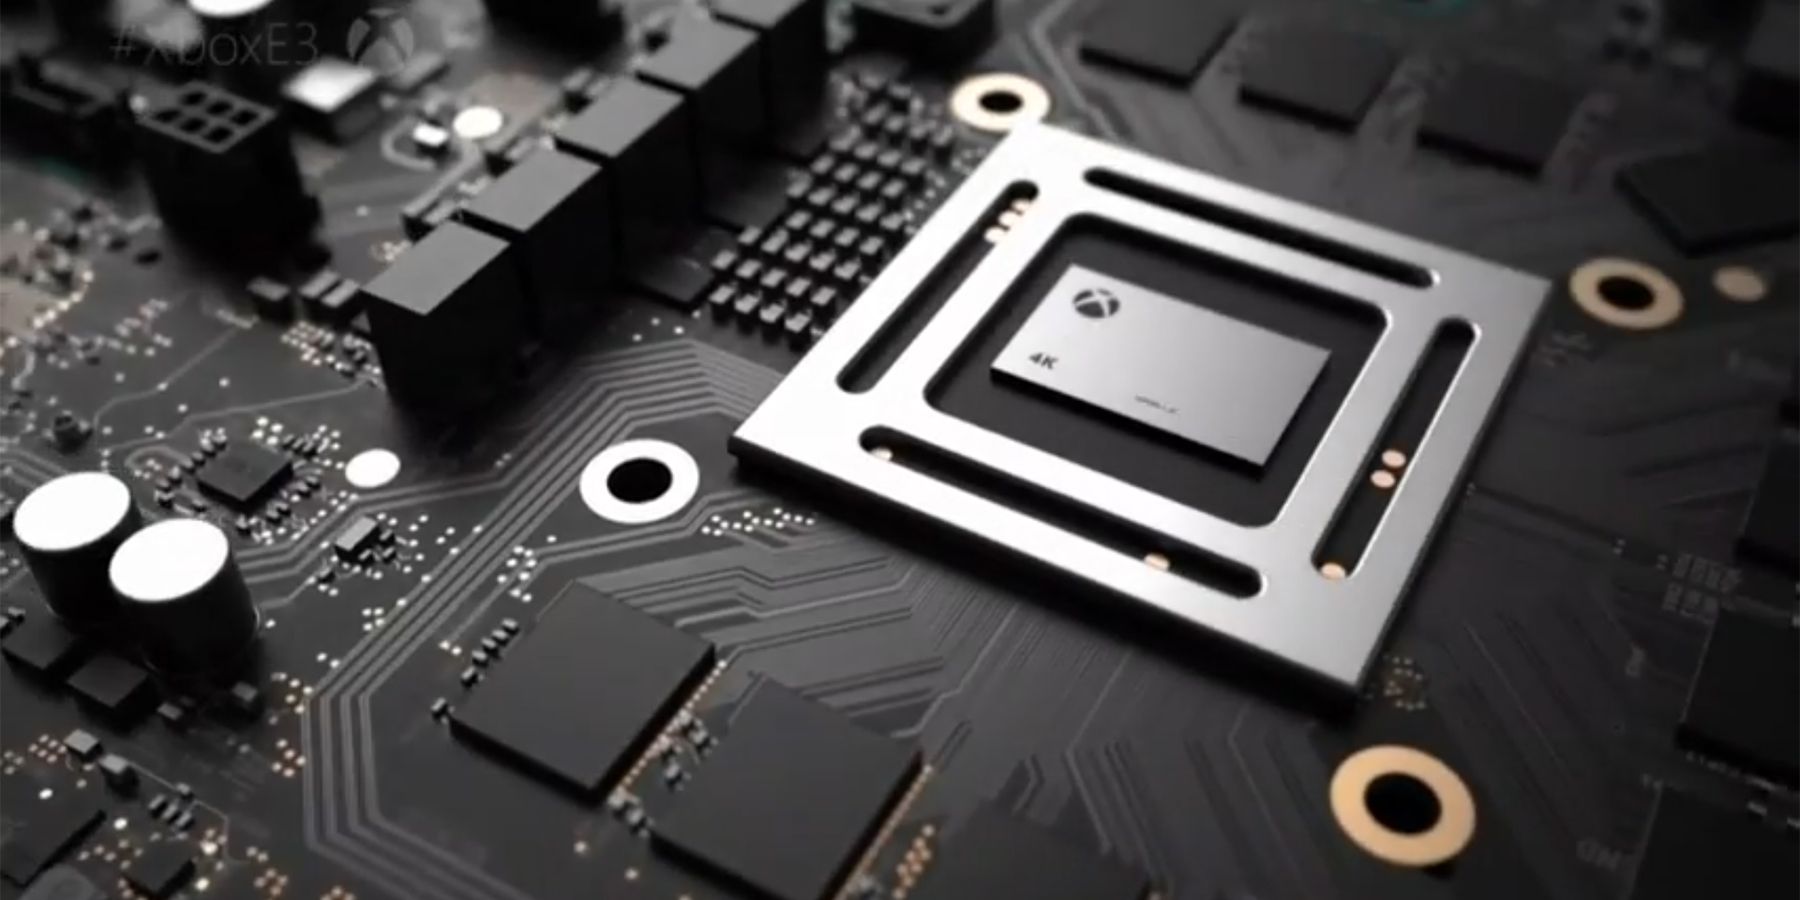 Microsoft's Xbox One Project Scorpio promises 4K gaming and uncompressed pixels